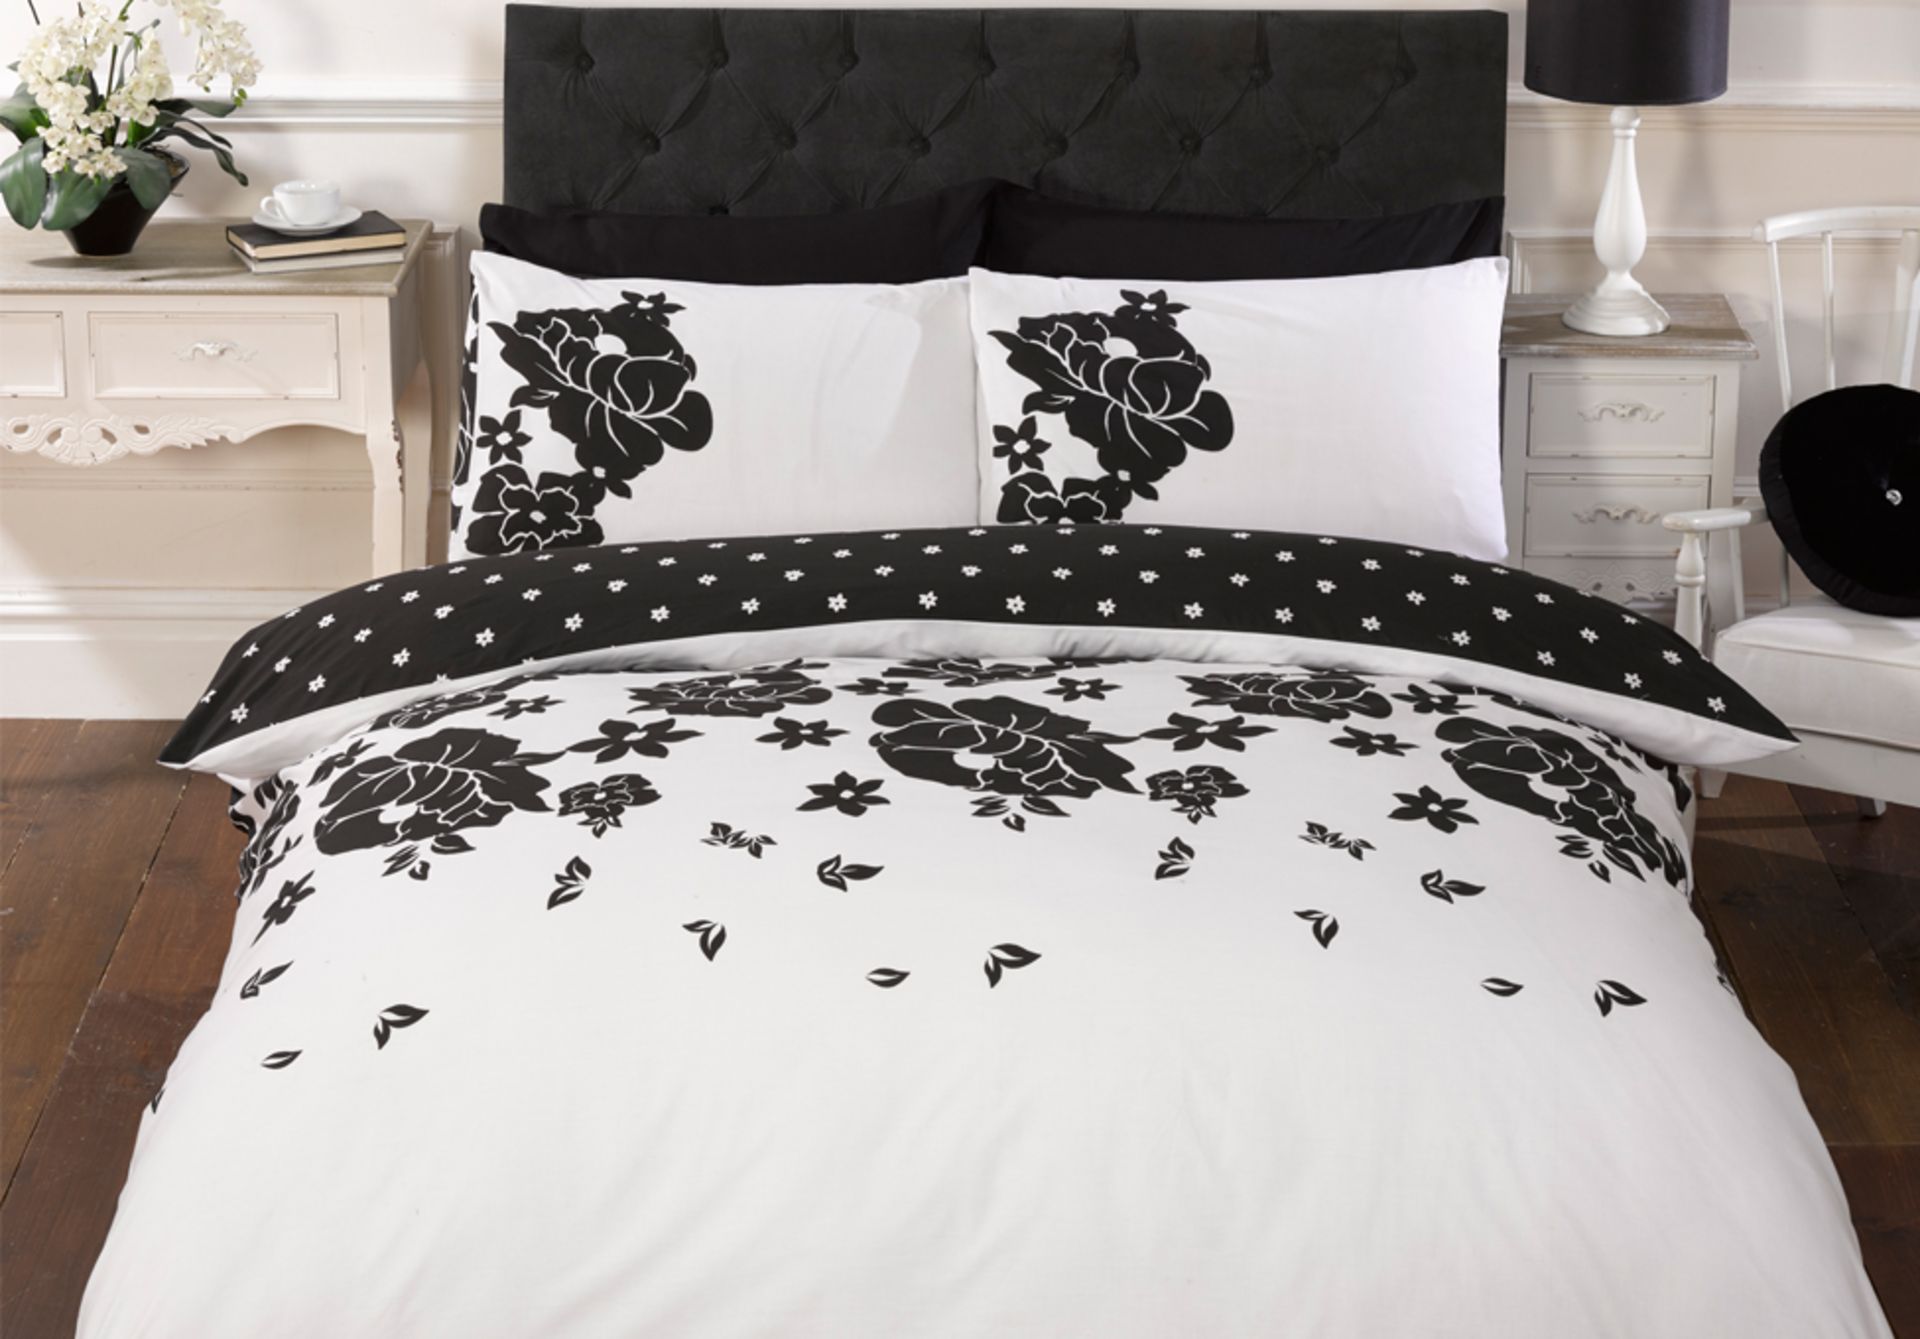 V Brand New 3 Piece Luxury Double Printed Duvet Set With Quilt Cover And 2 Pillow Cases Isabel